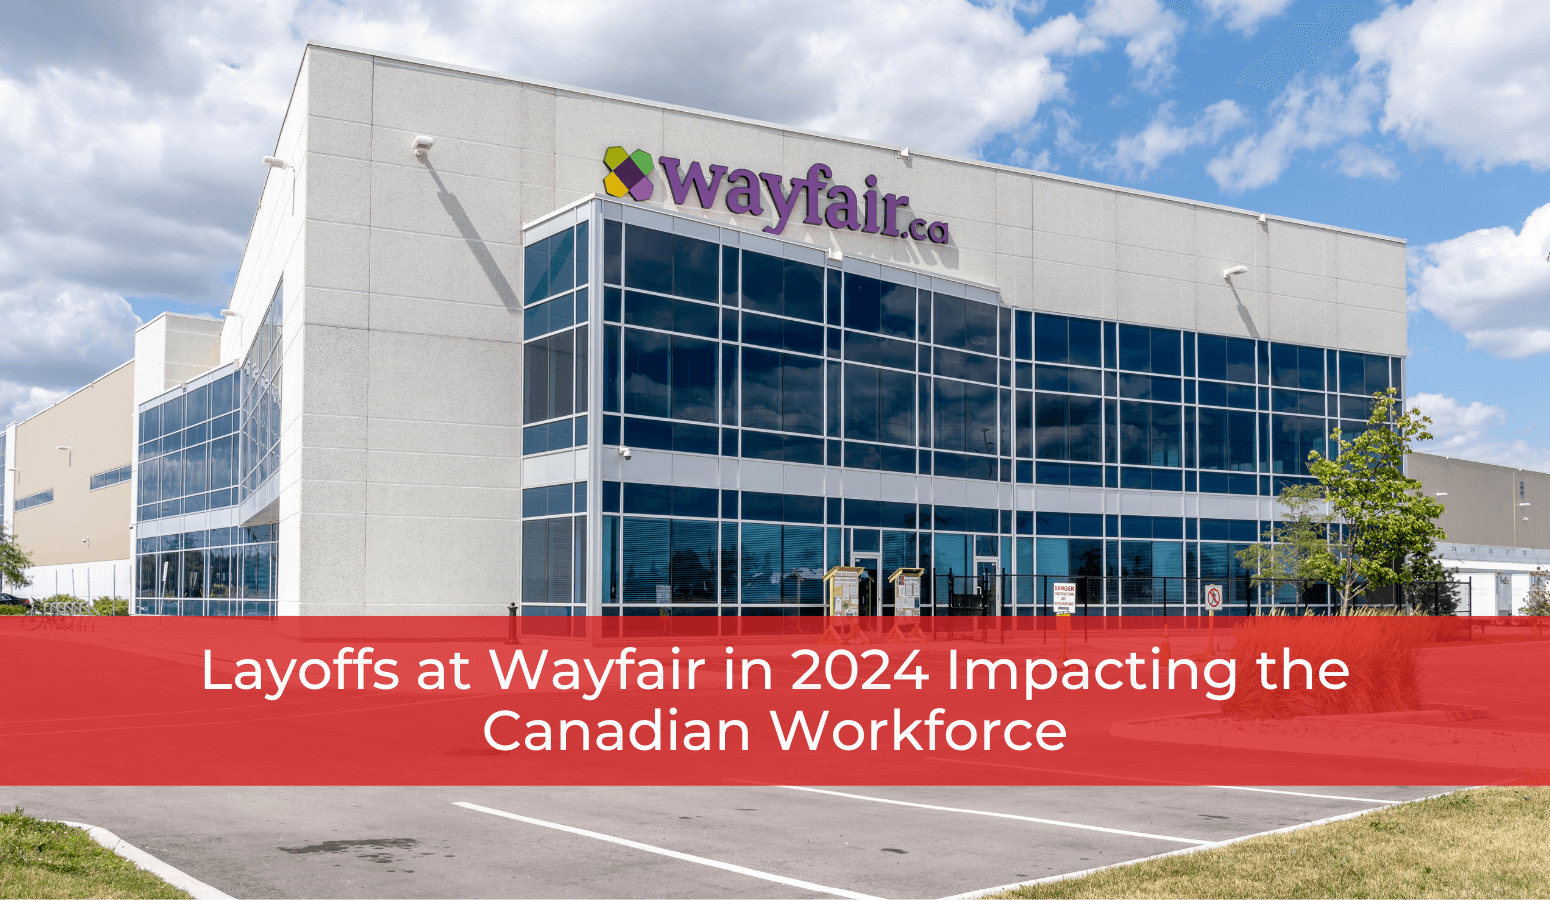 Featured image for “Layoffs at Wayfair in 2024 Impacting the Canadian Workforce”